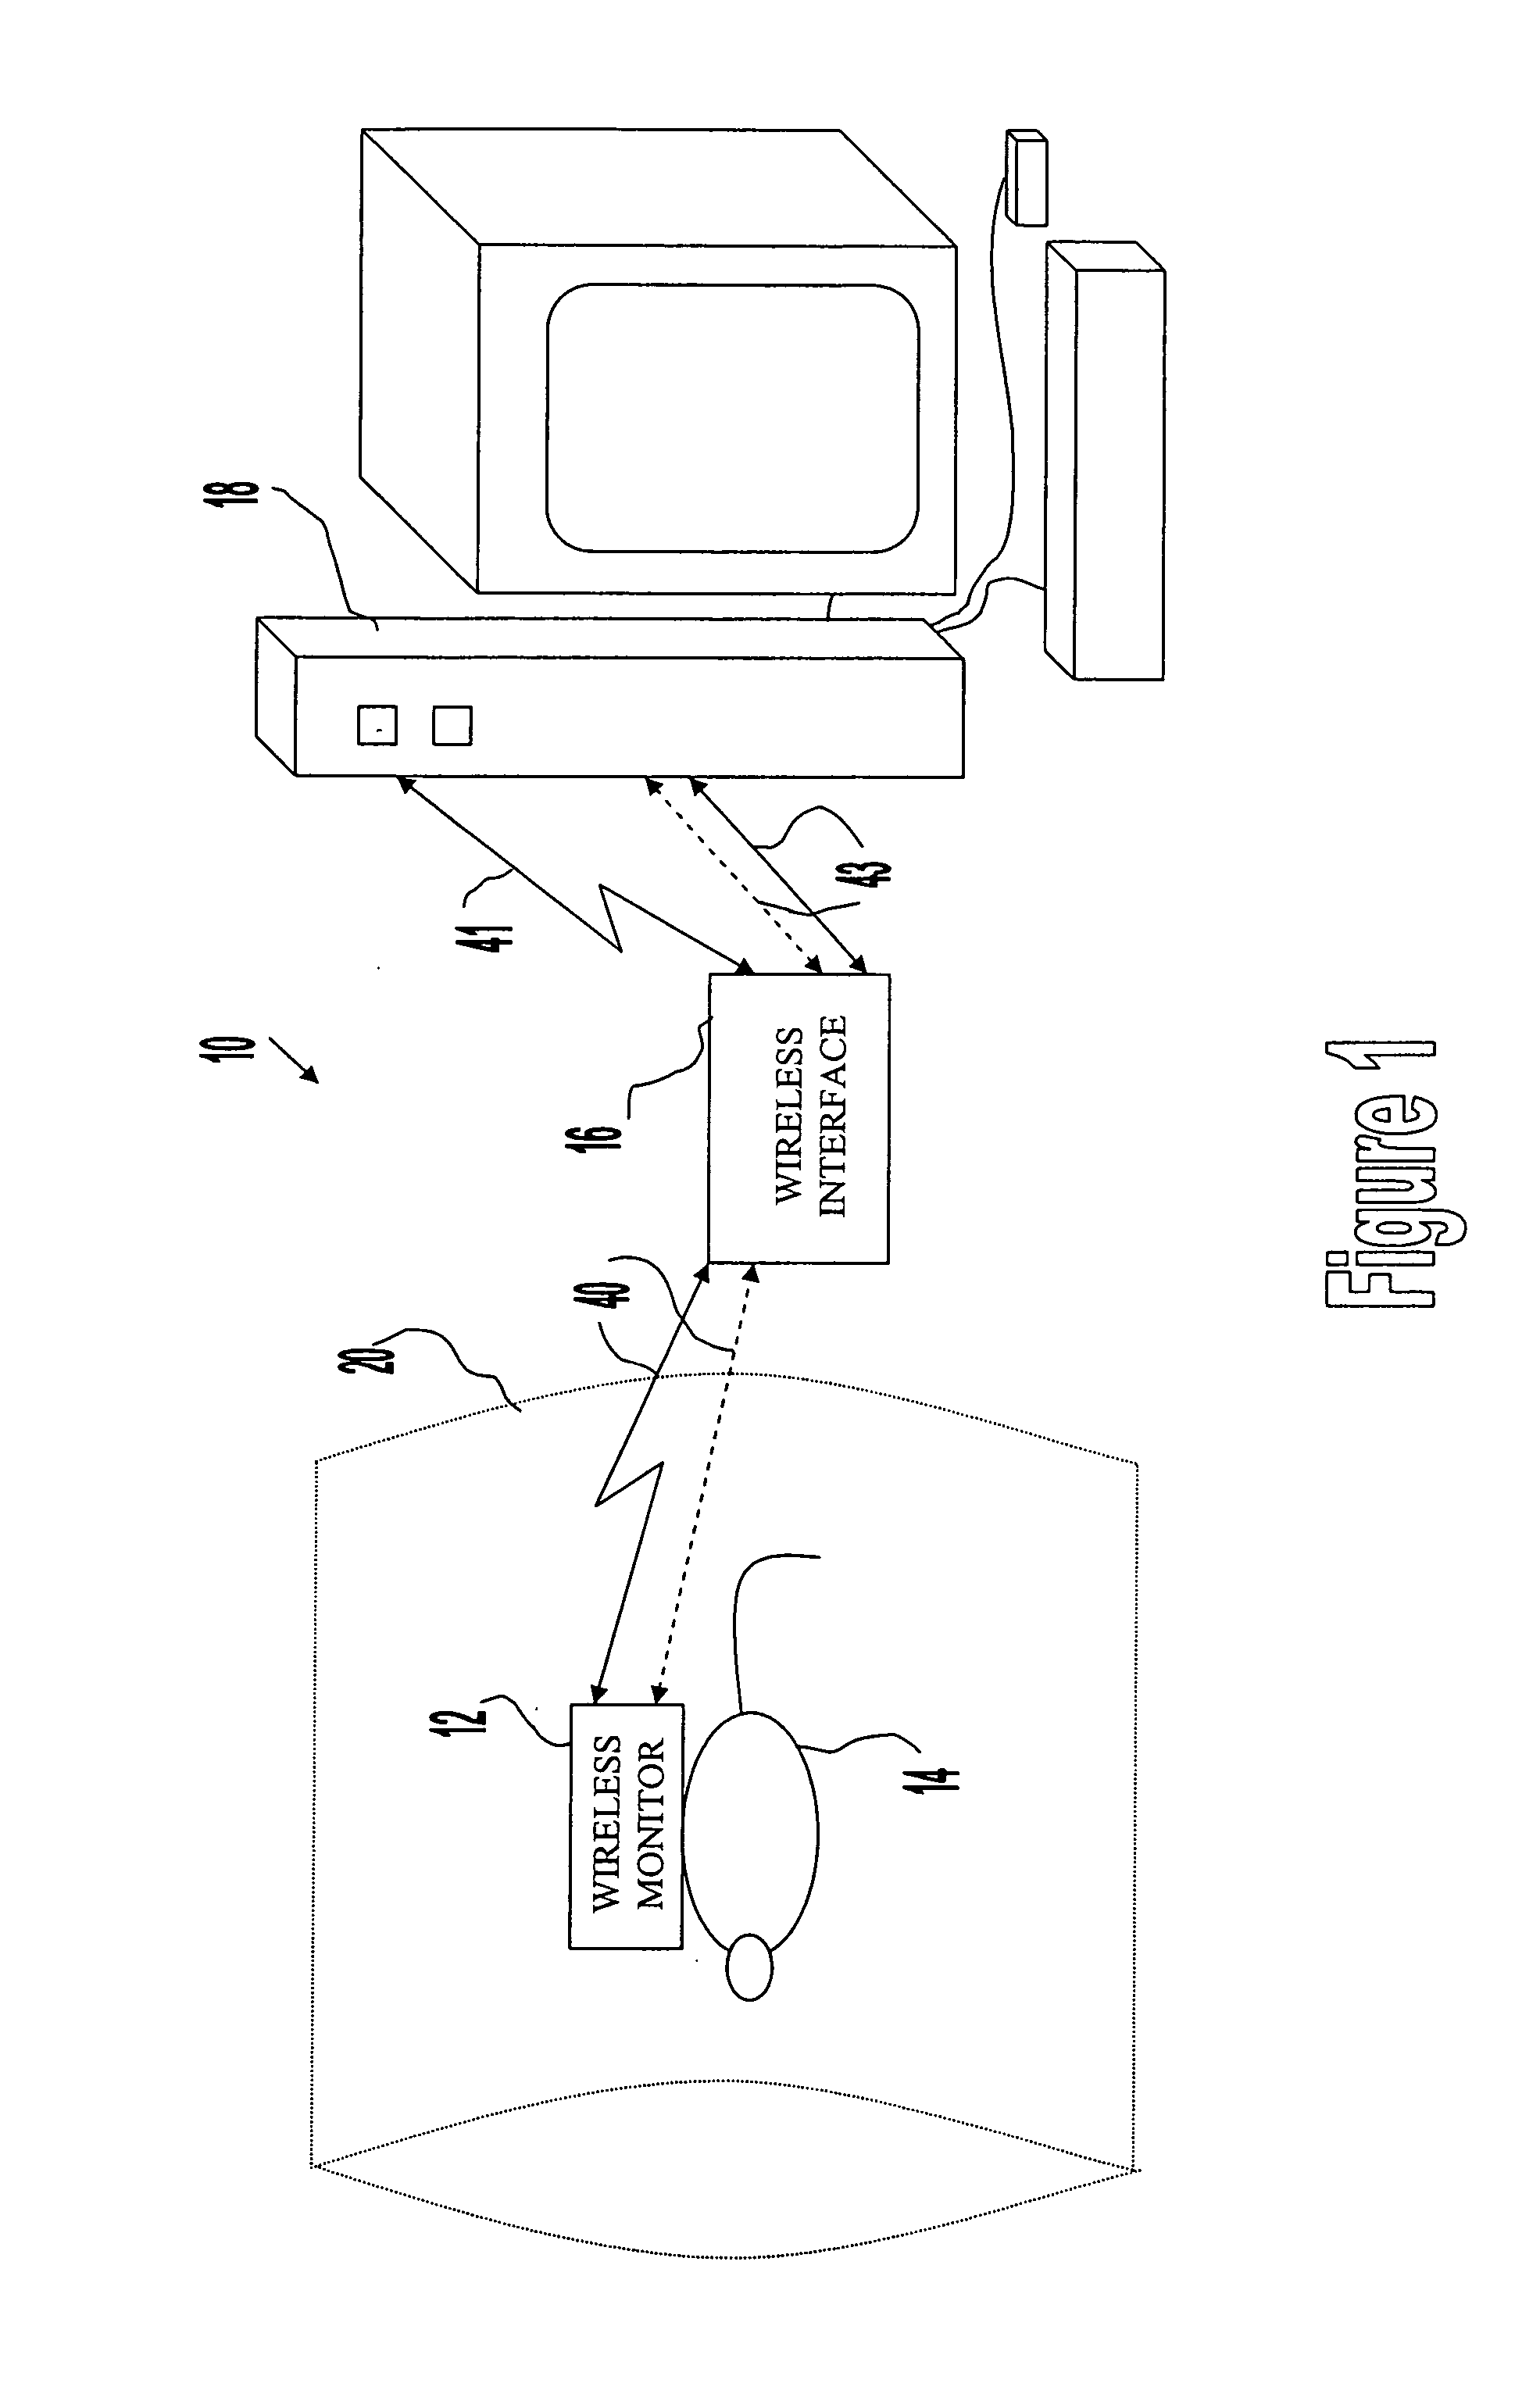 Method and apparatus for wireless monitoring of subjects within a magnetic field